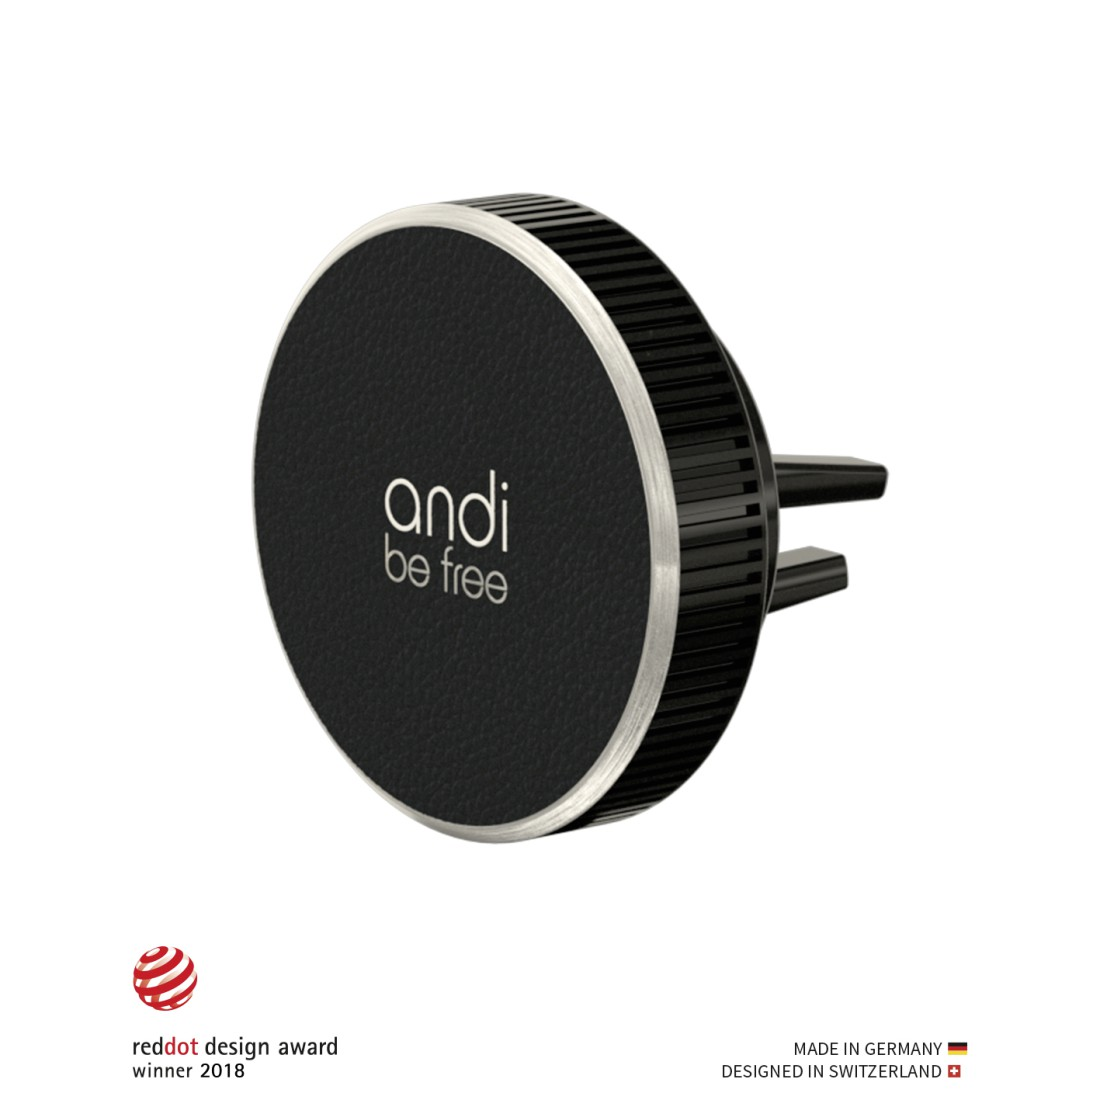 Mount Fast BE induktive FREE Vent ANDI ladestation, Charger Schwarz Wireless